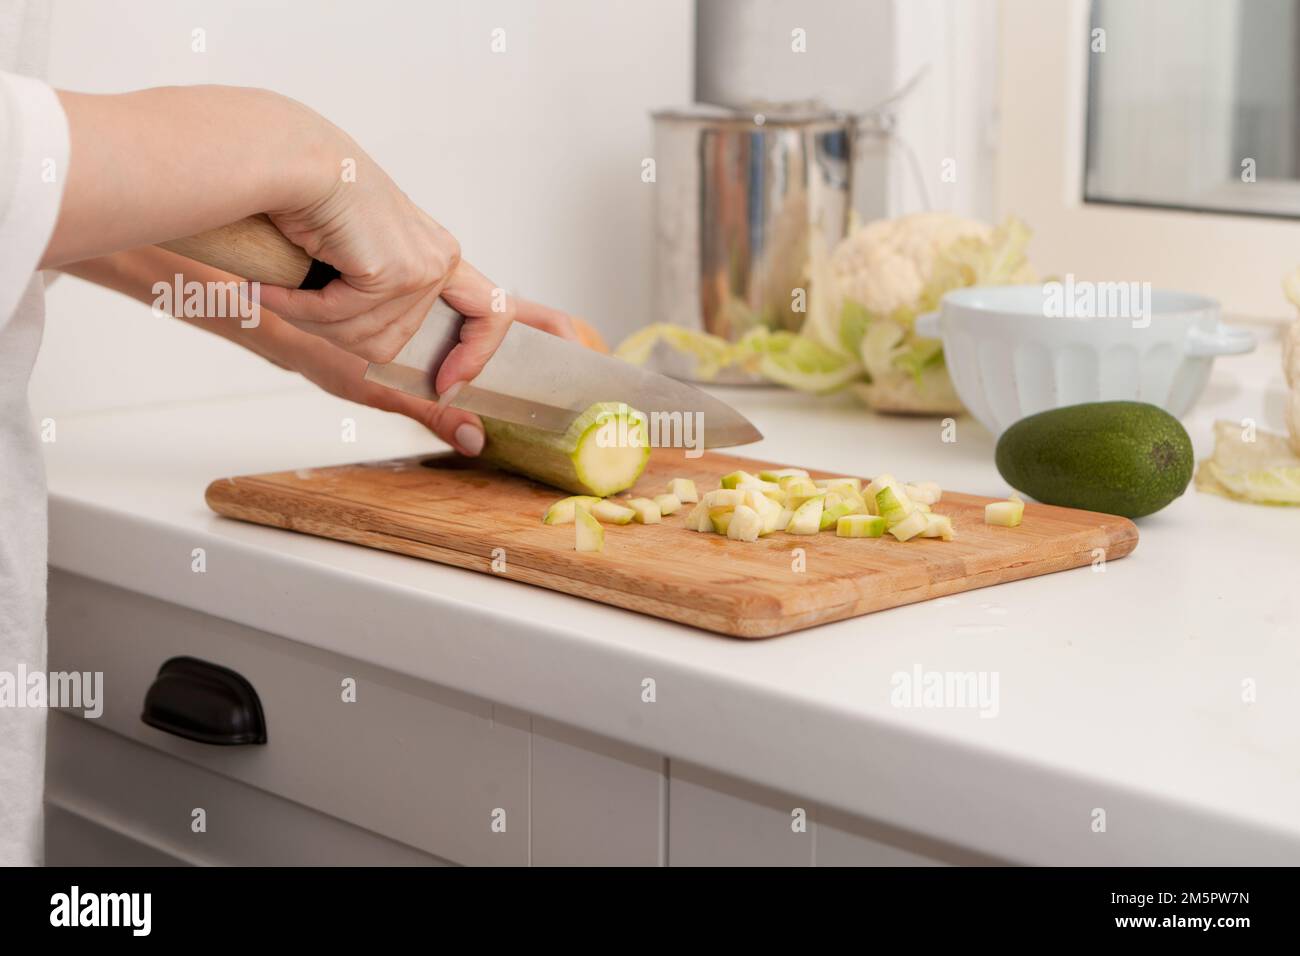 woman hands cutting vegetables at kitchen. Healthy and easy food. Close-up sliced vegetable marrow Stock Photo